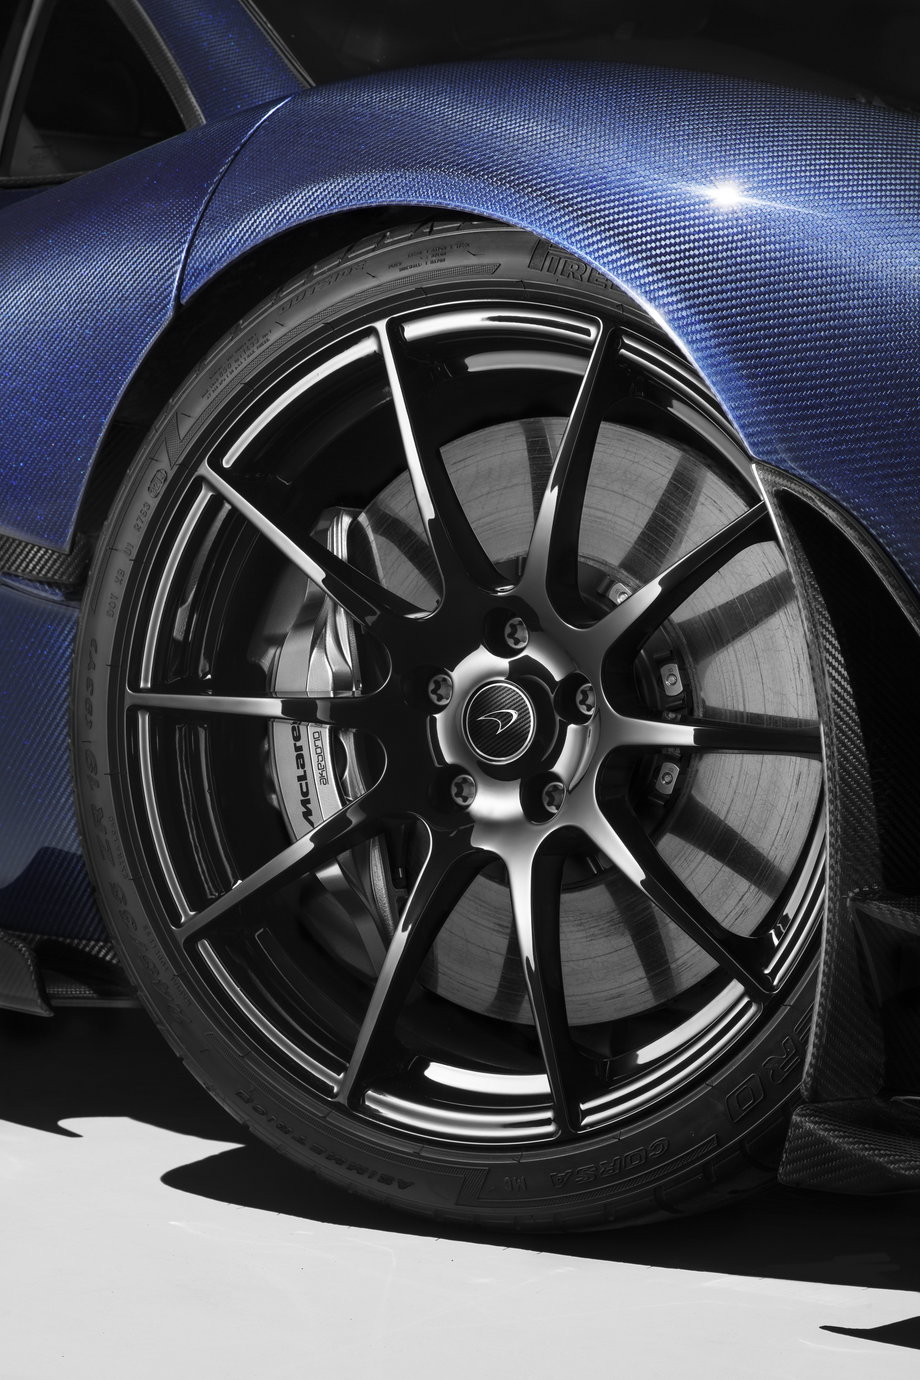 The gloss-black wheels are also a custom feature. About the only thing that would stop you faster than those carbon-ceramic brakes would be a brick wall.